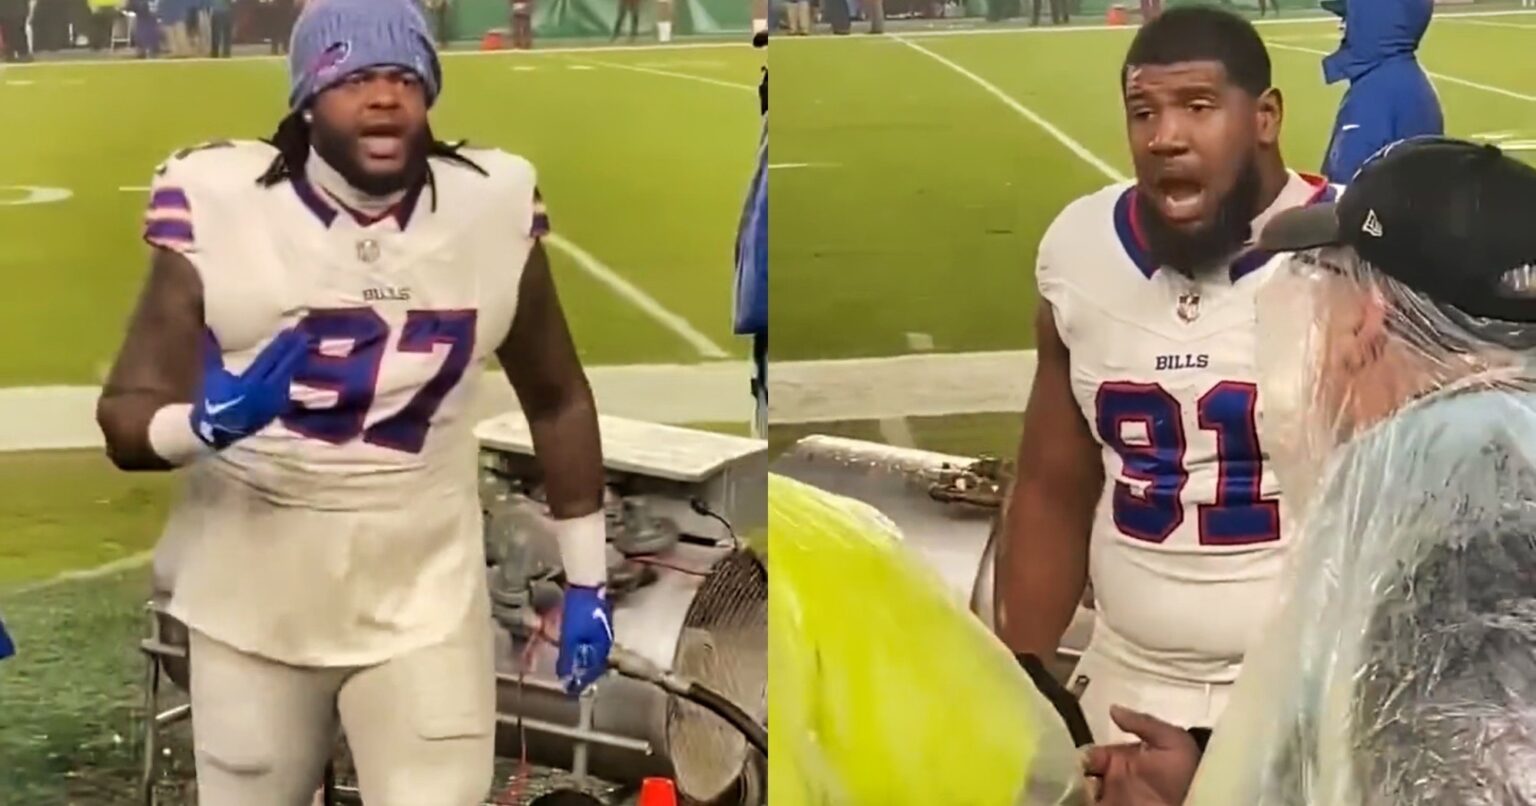 Players for the Buffalo Bills Are Exposed in New Video Lying About Remarks Made by a Philadelphia Eagles Fan (VIDEO)